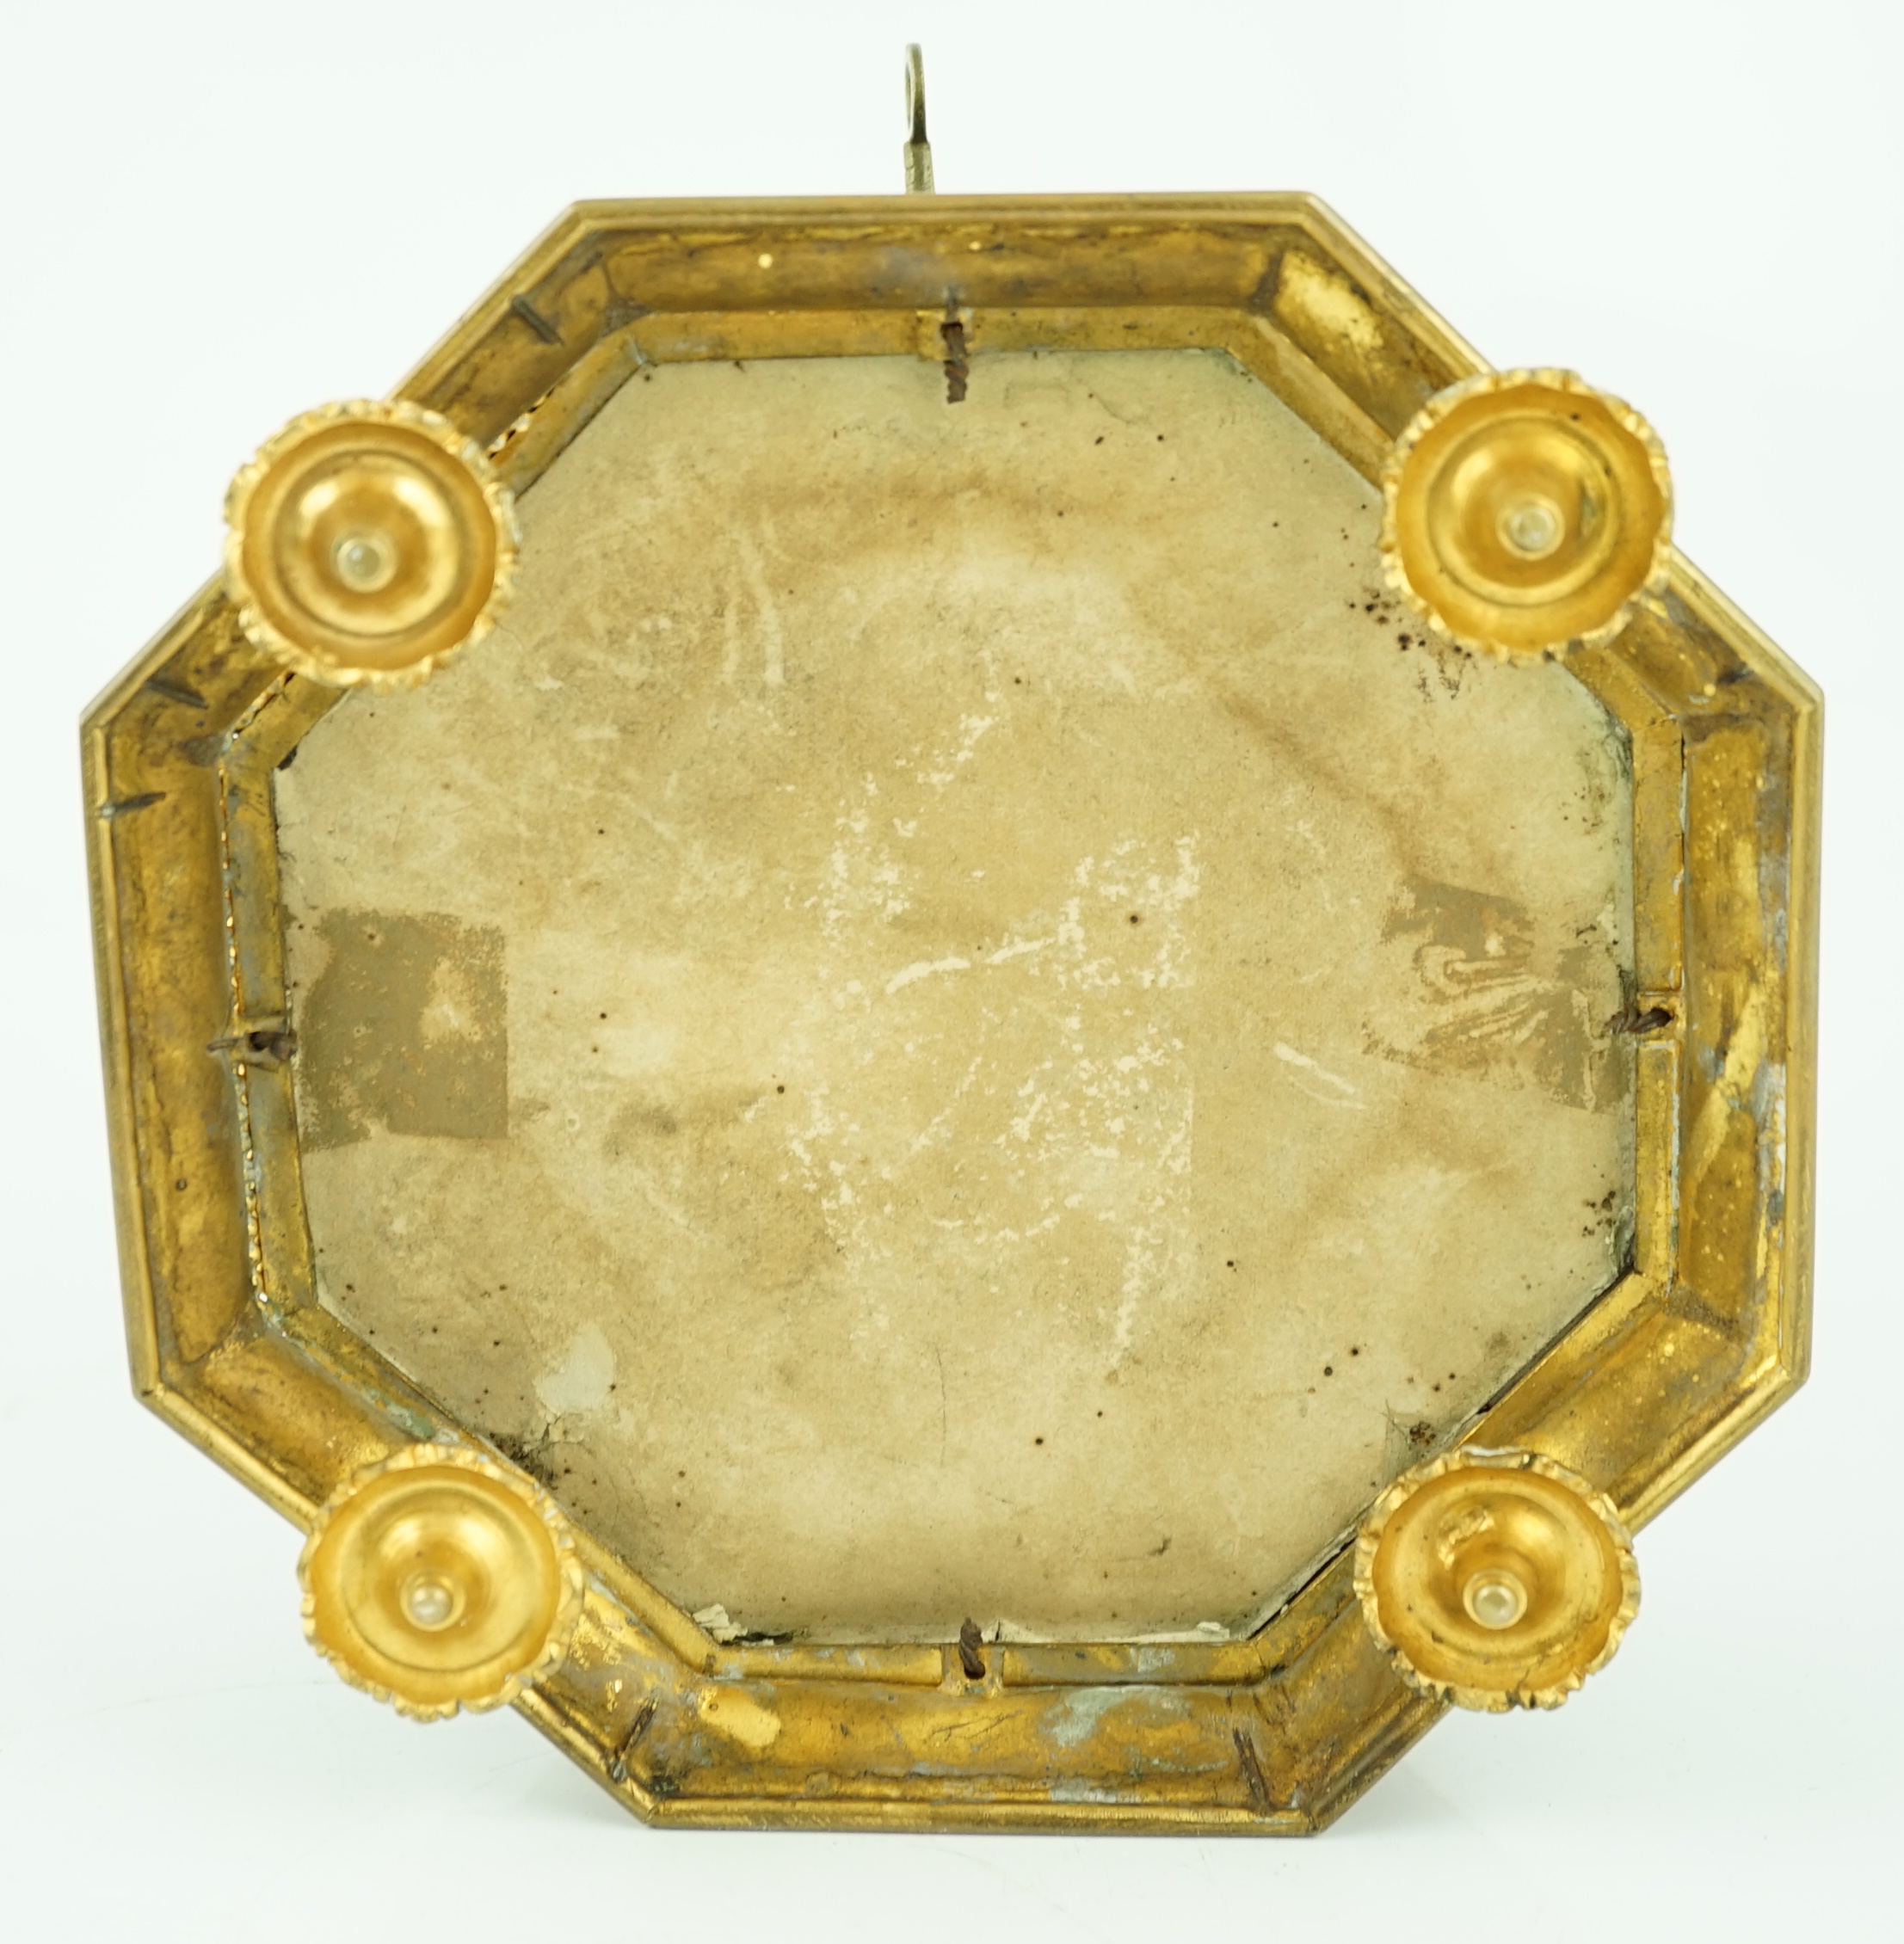 A 19th century French Limoges enamel casket, of octagonal form with jewelled floral decoration and - Image 7 of 7